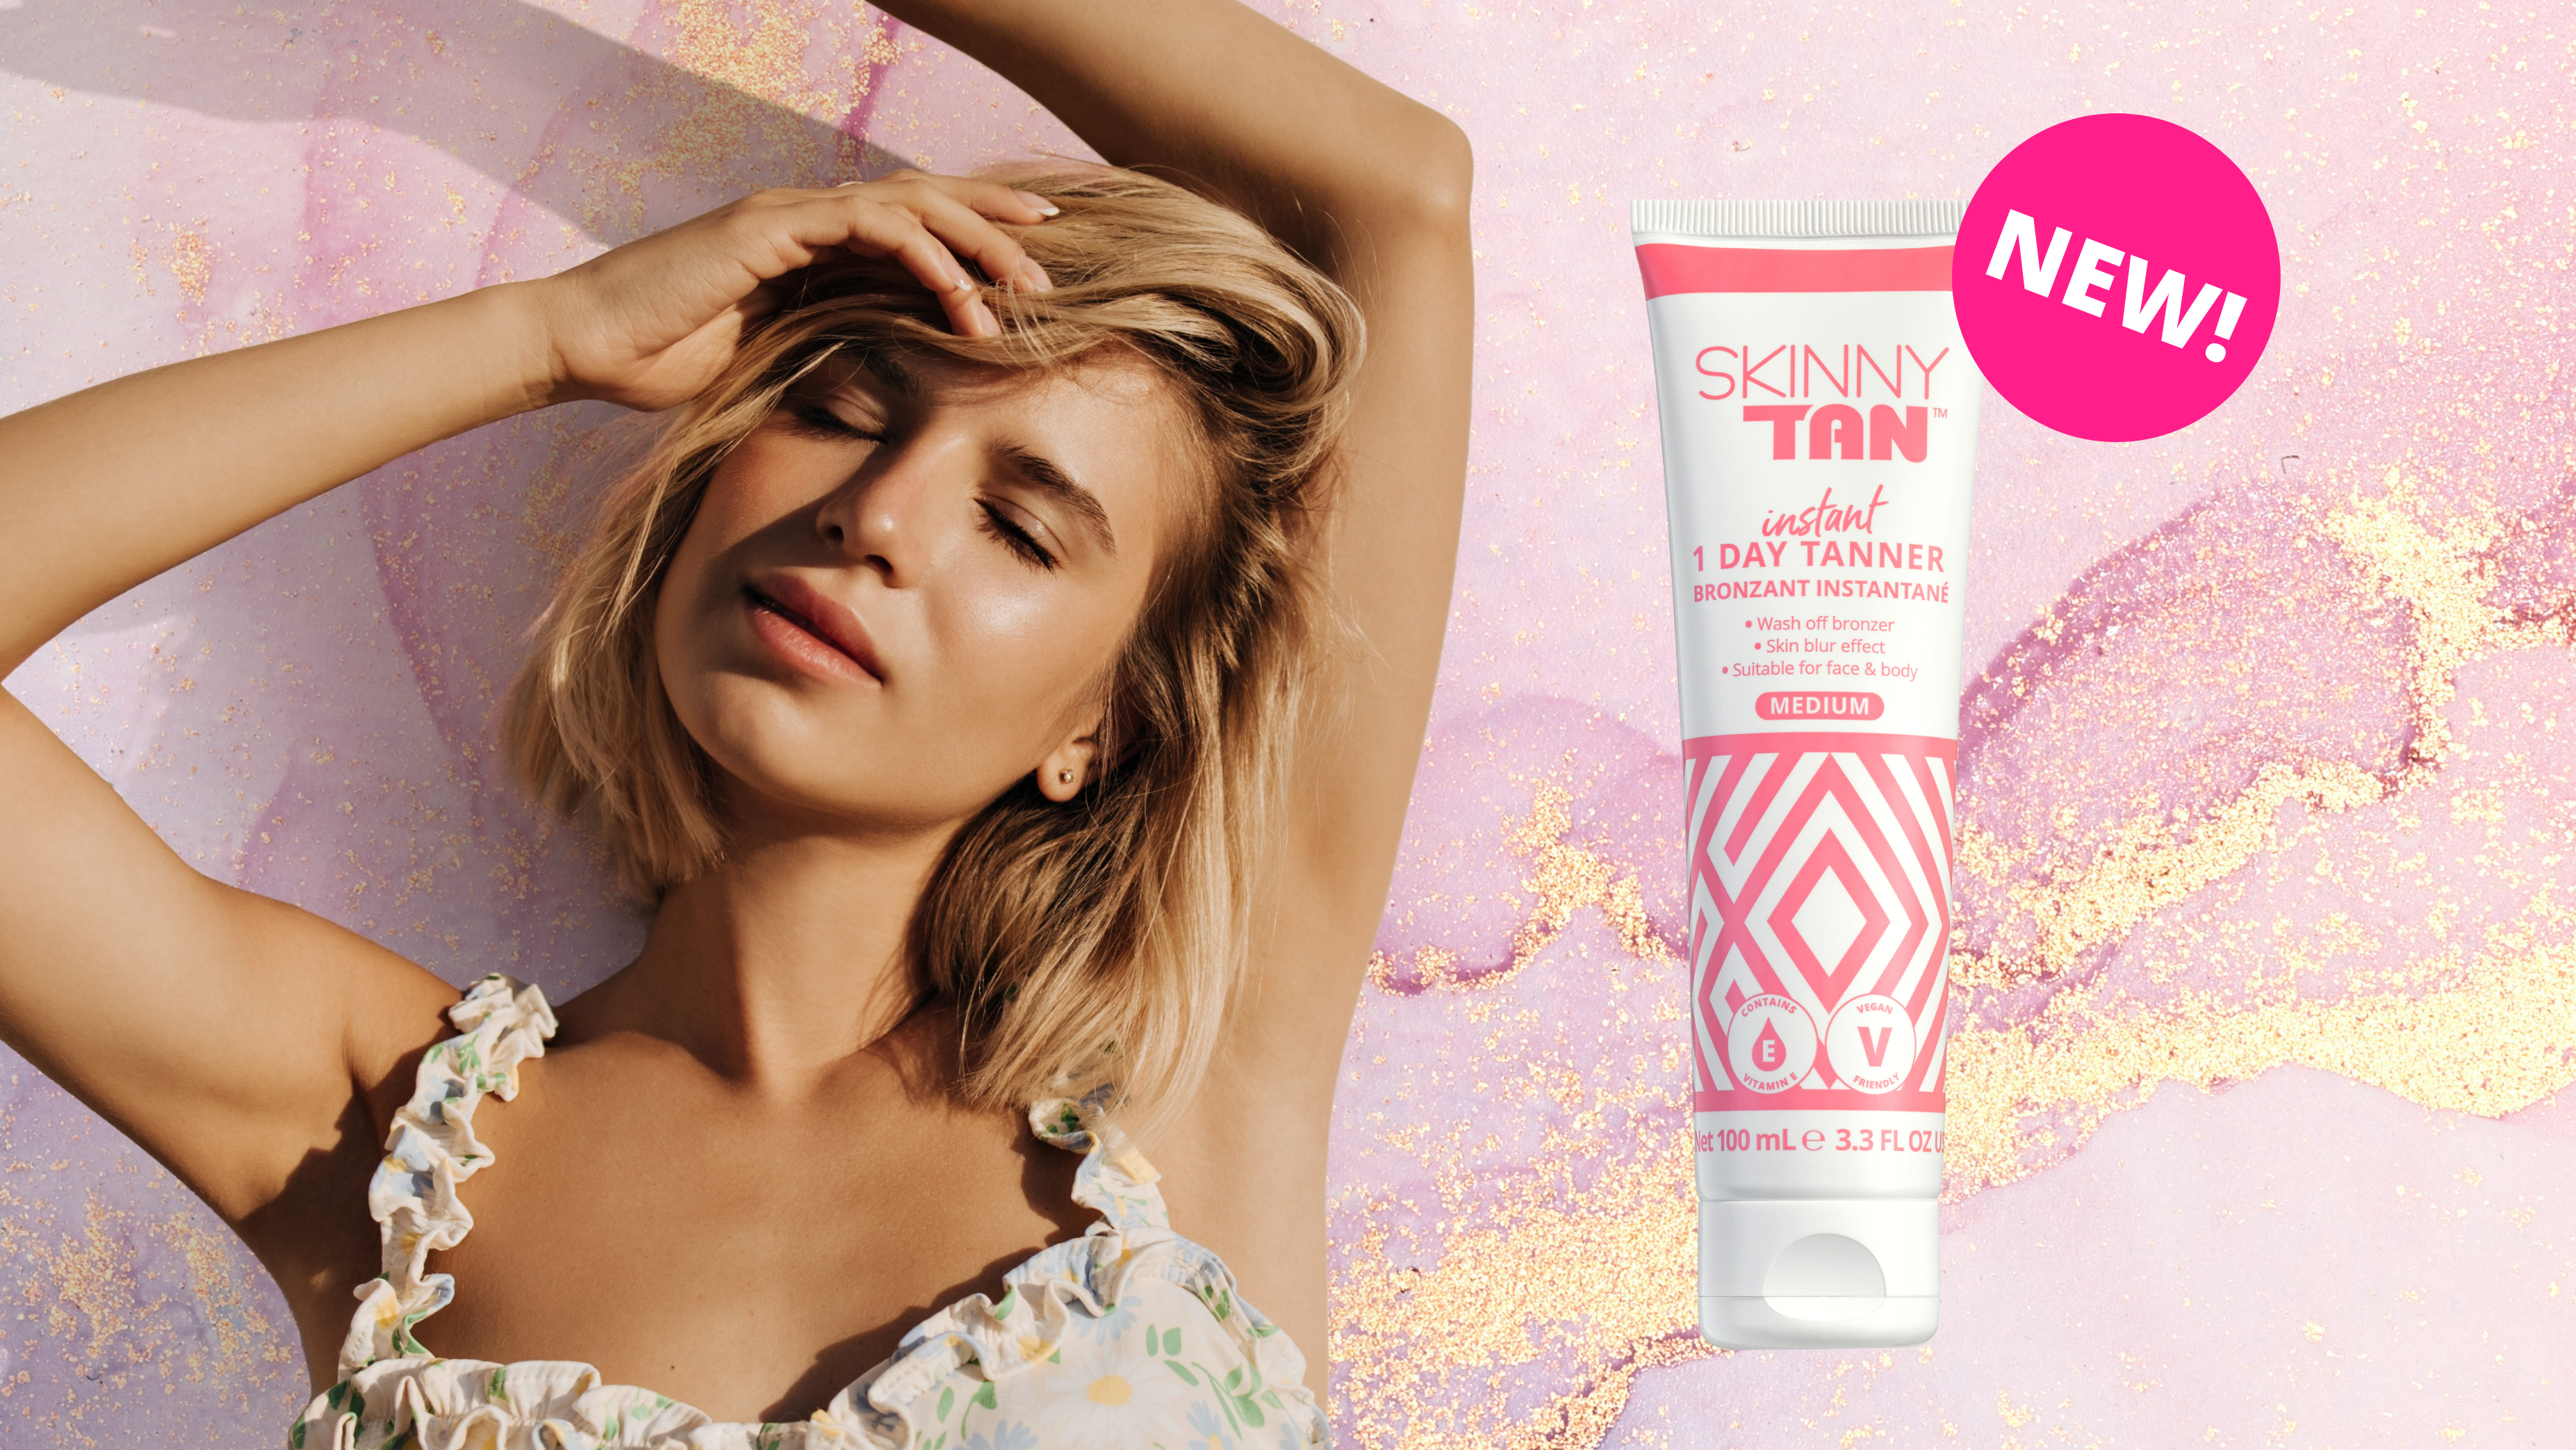 NEW NEW NEW: ‘The best instant tanner I have EVER used!’